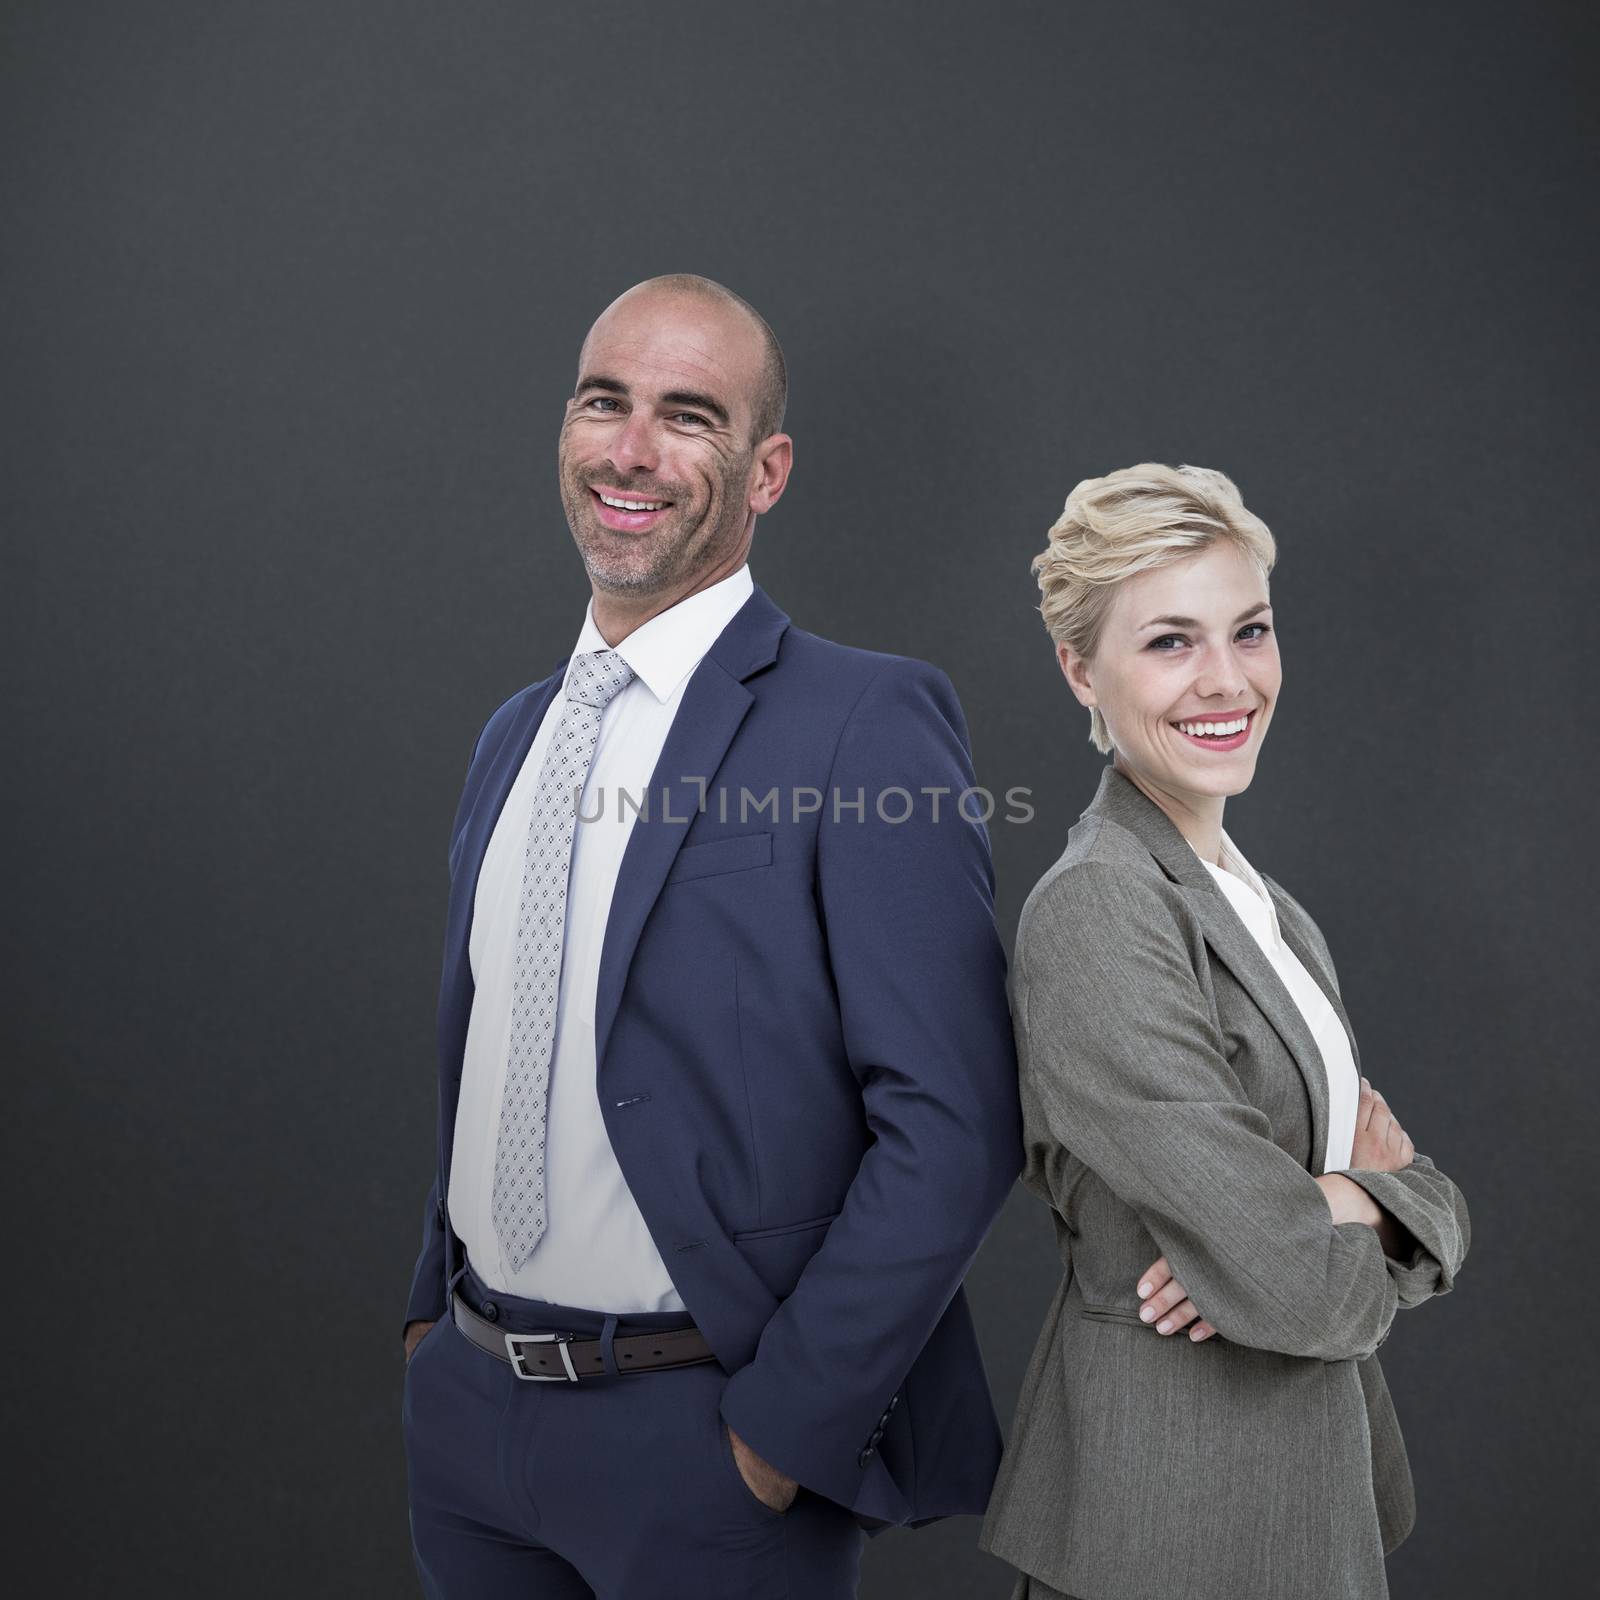  Smiling business people back-to-back against grey background